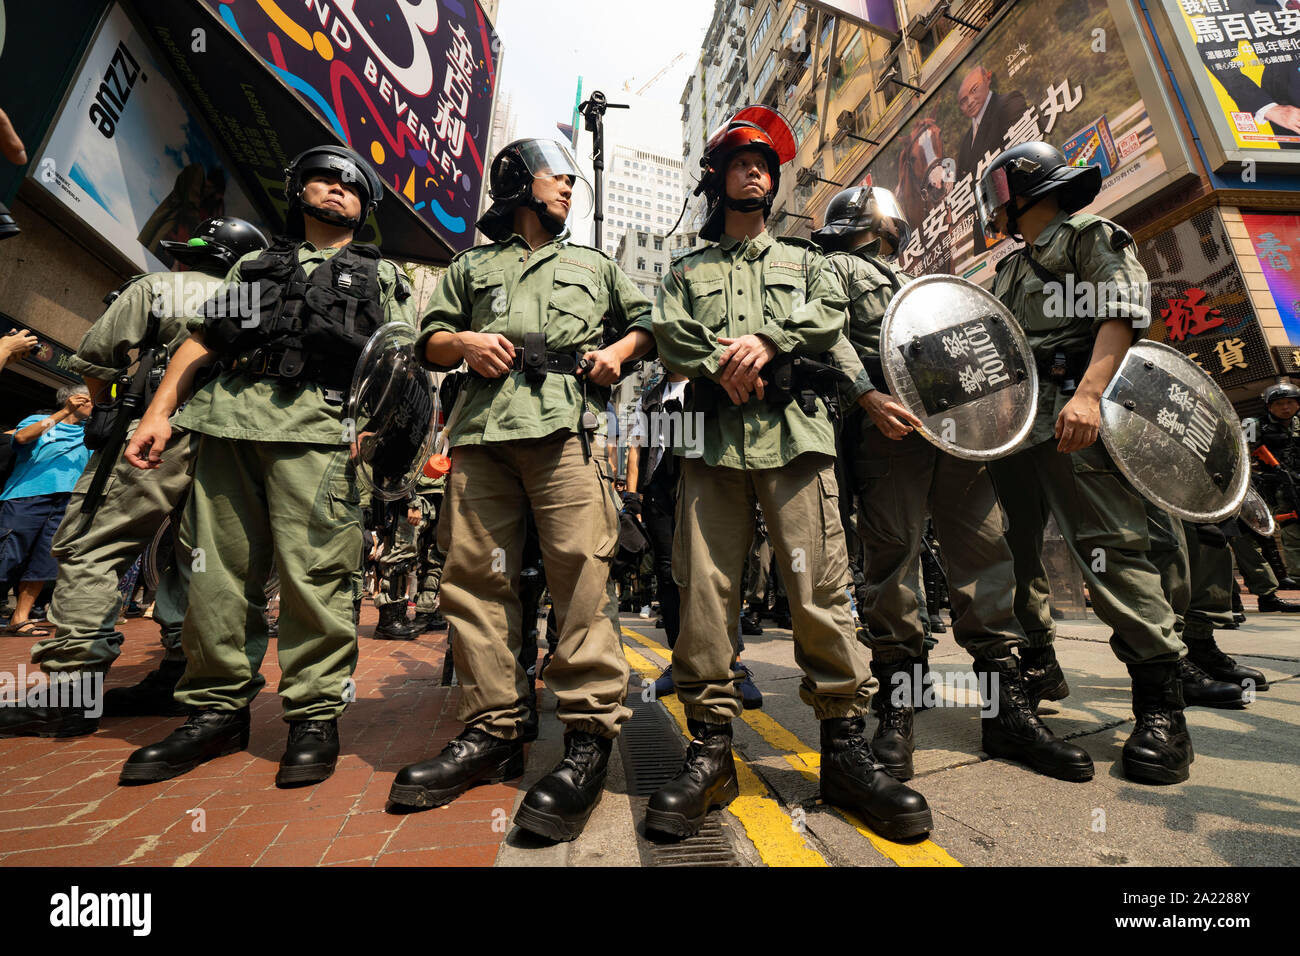 Hong Kong. 29 September, 2019. Illegal march by thousands of pro-democracy supporters from Causeway Bay to Government offices at Admiralty. Police unsuccessfully tried to stop march at start with teargas fired and scuffles. March marked the 5th anniversary of the start of the Umbrella Movement. Riot police control crowds in busy Causeway bay before march. Stock Photo